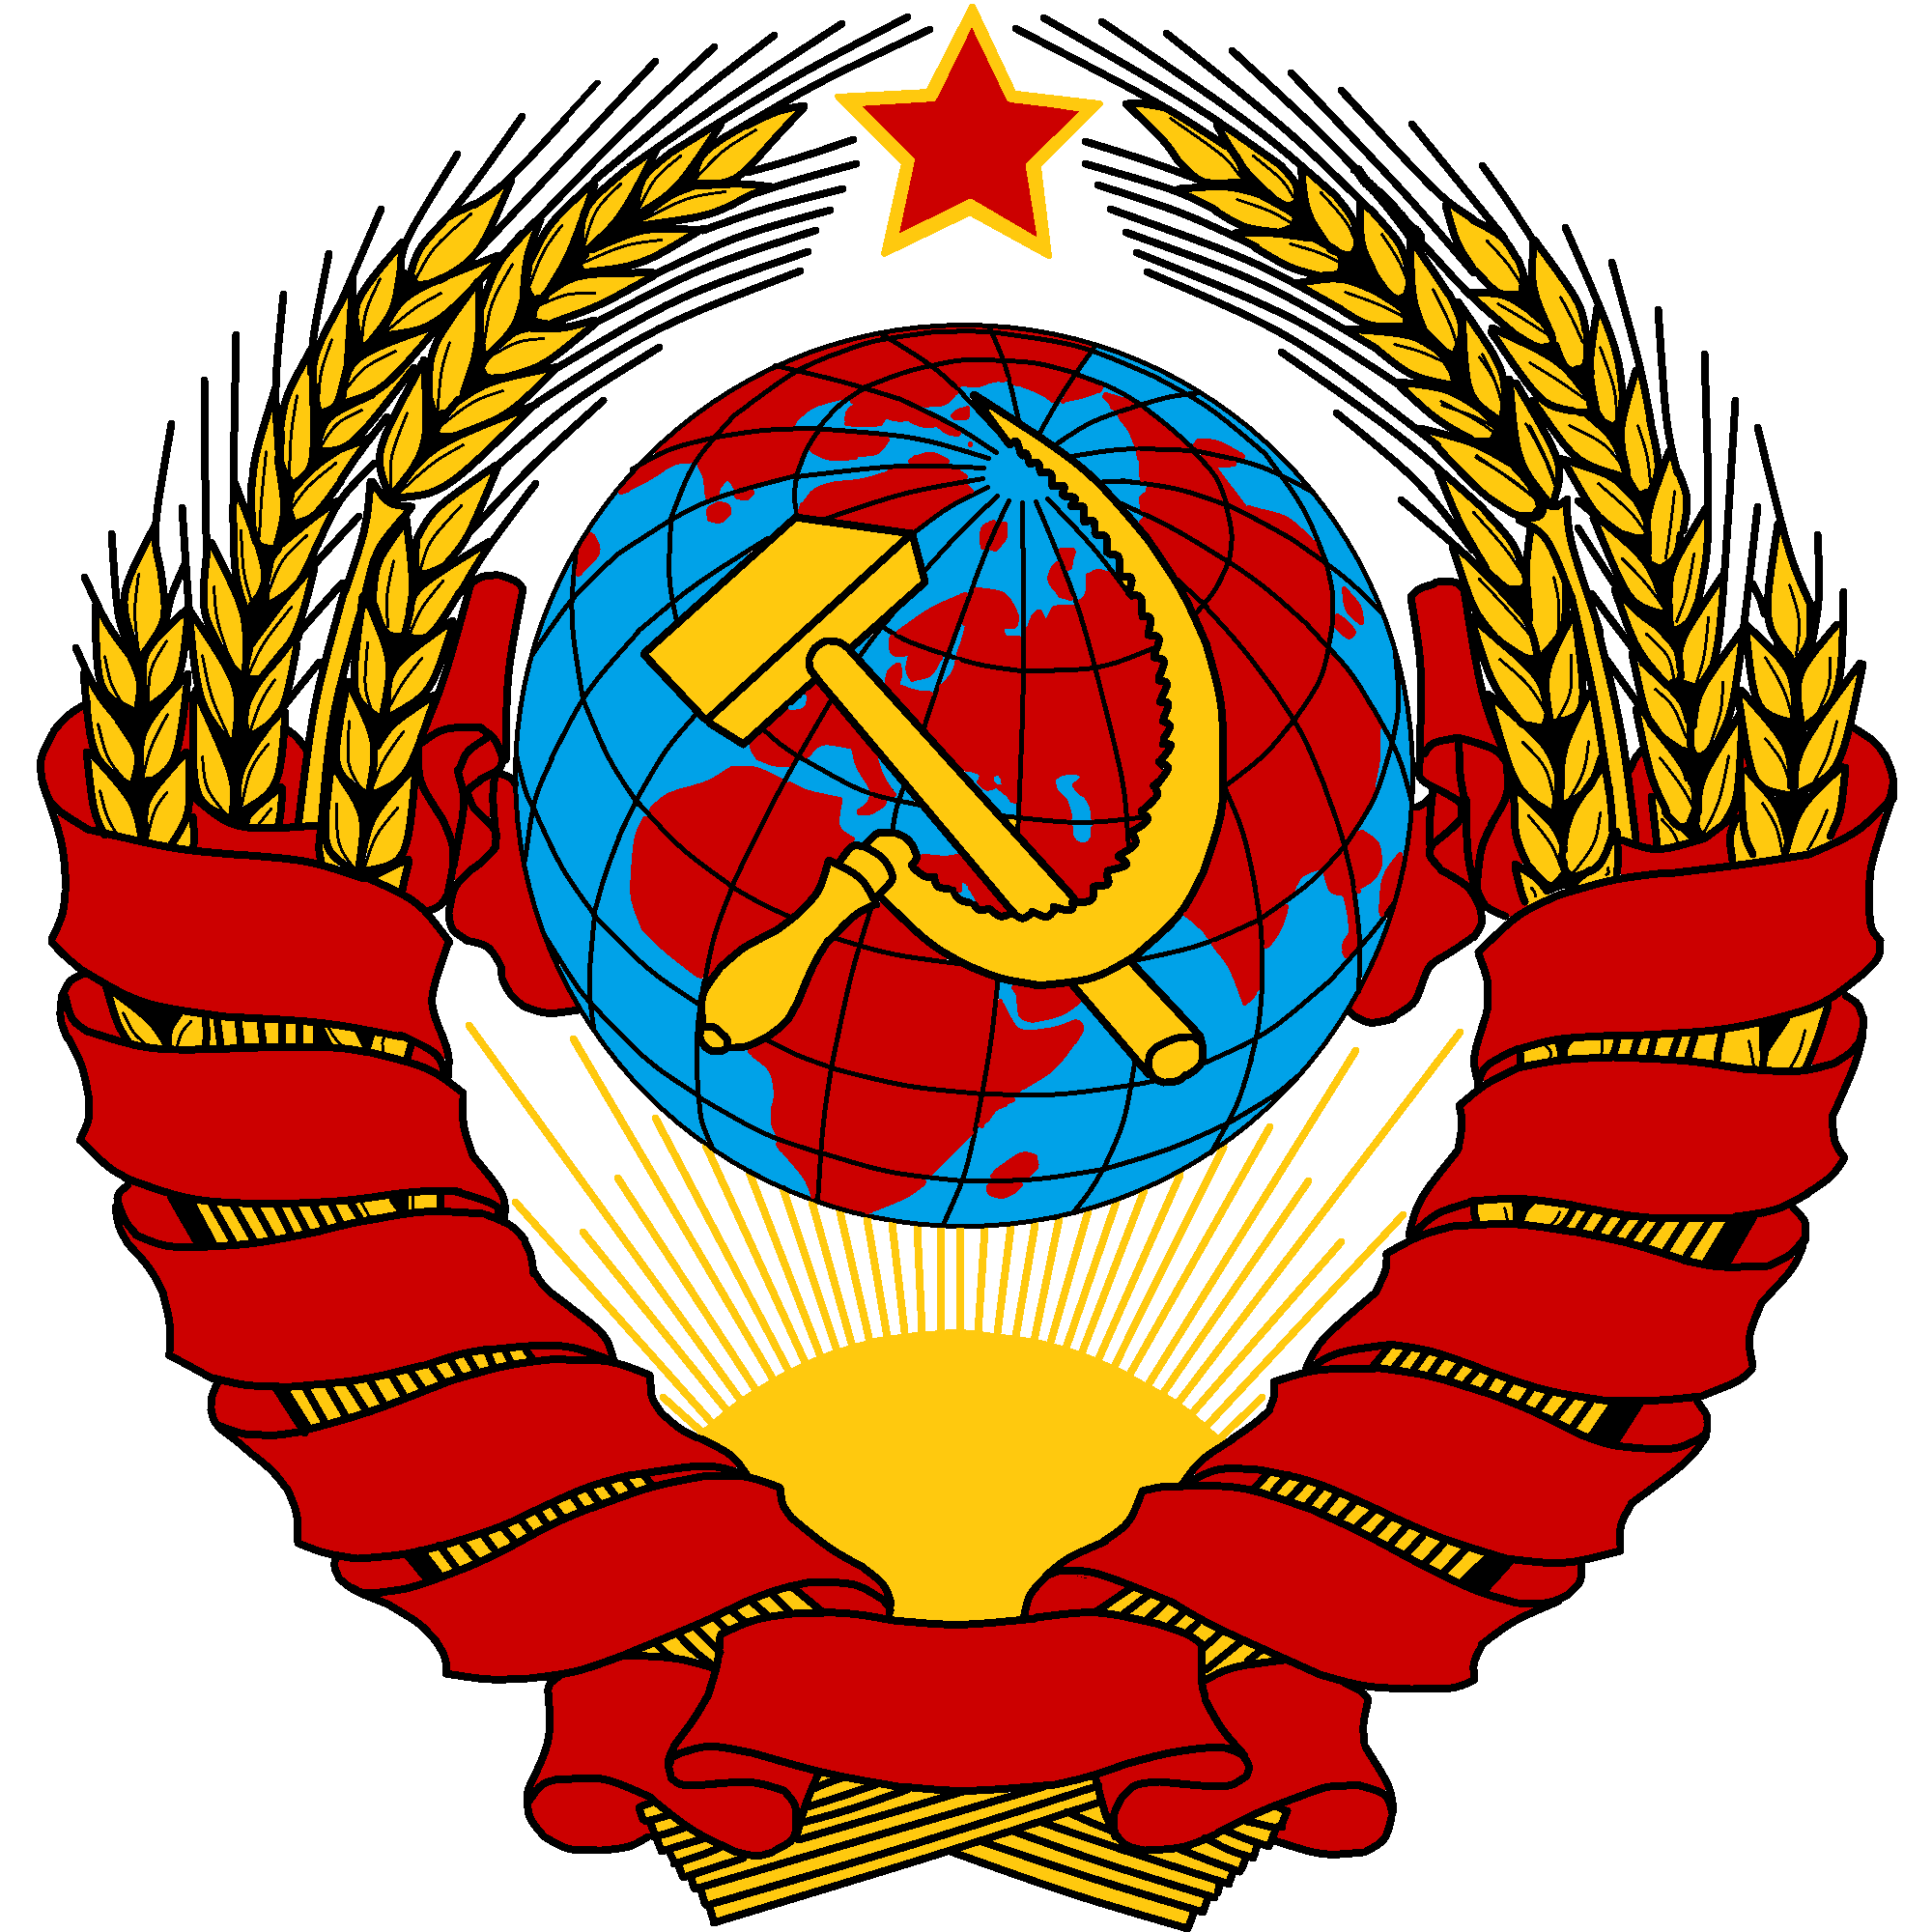 image-ussr-emblem-1936-png-central-victory-wiki-fandom-powered-by